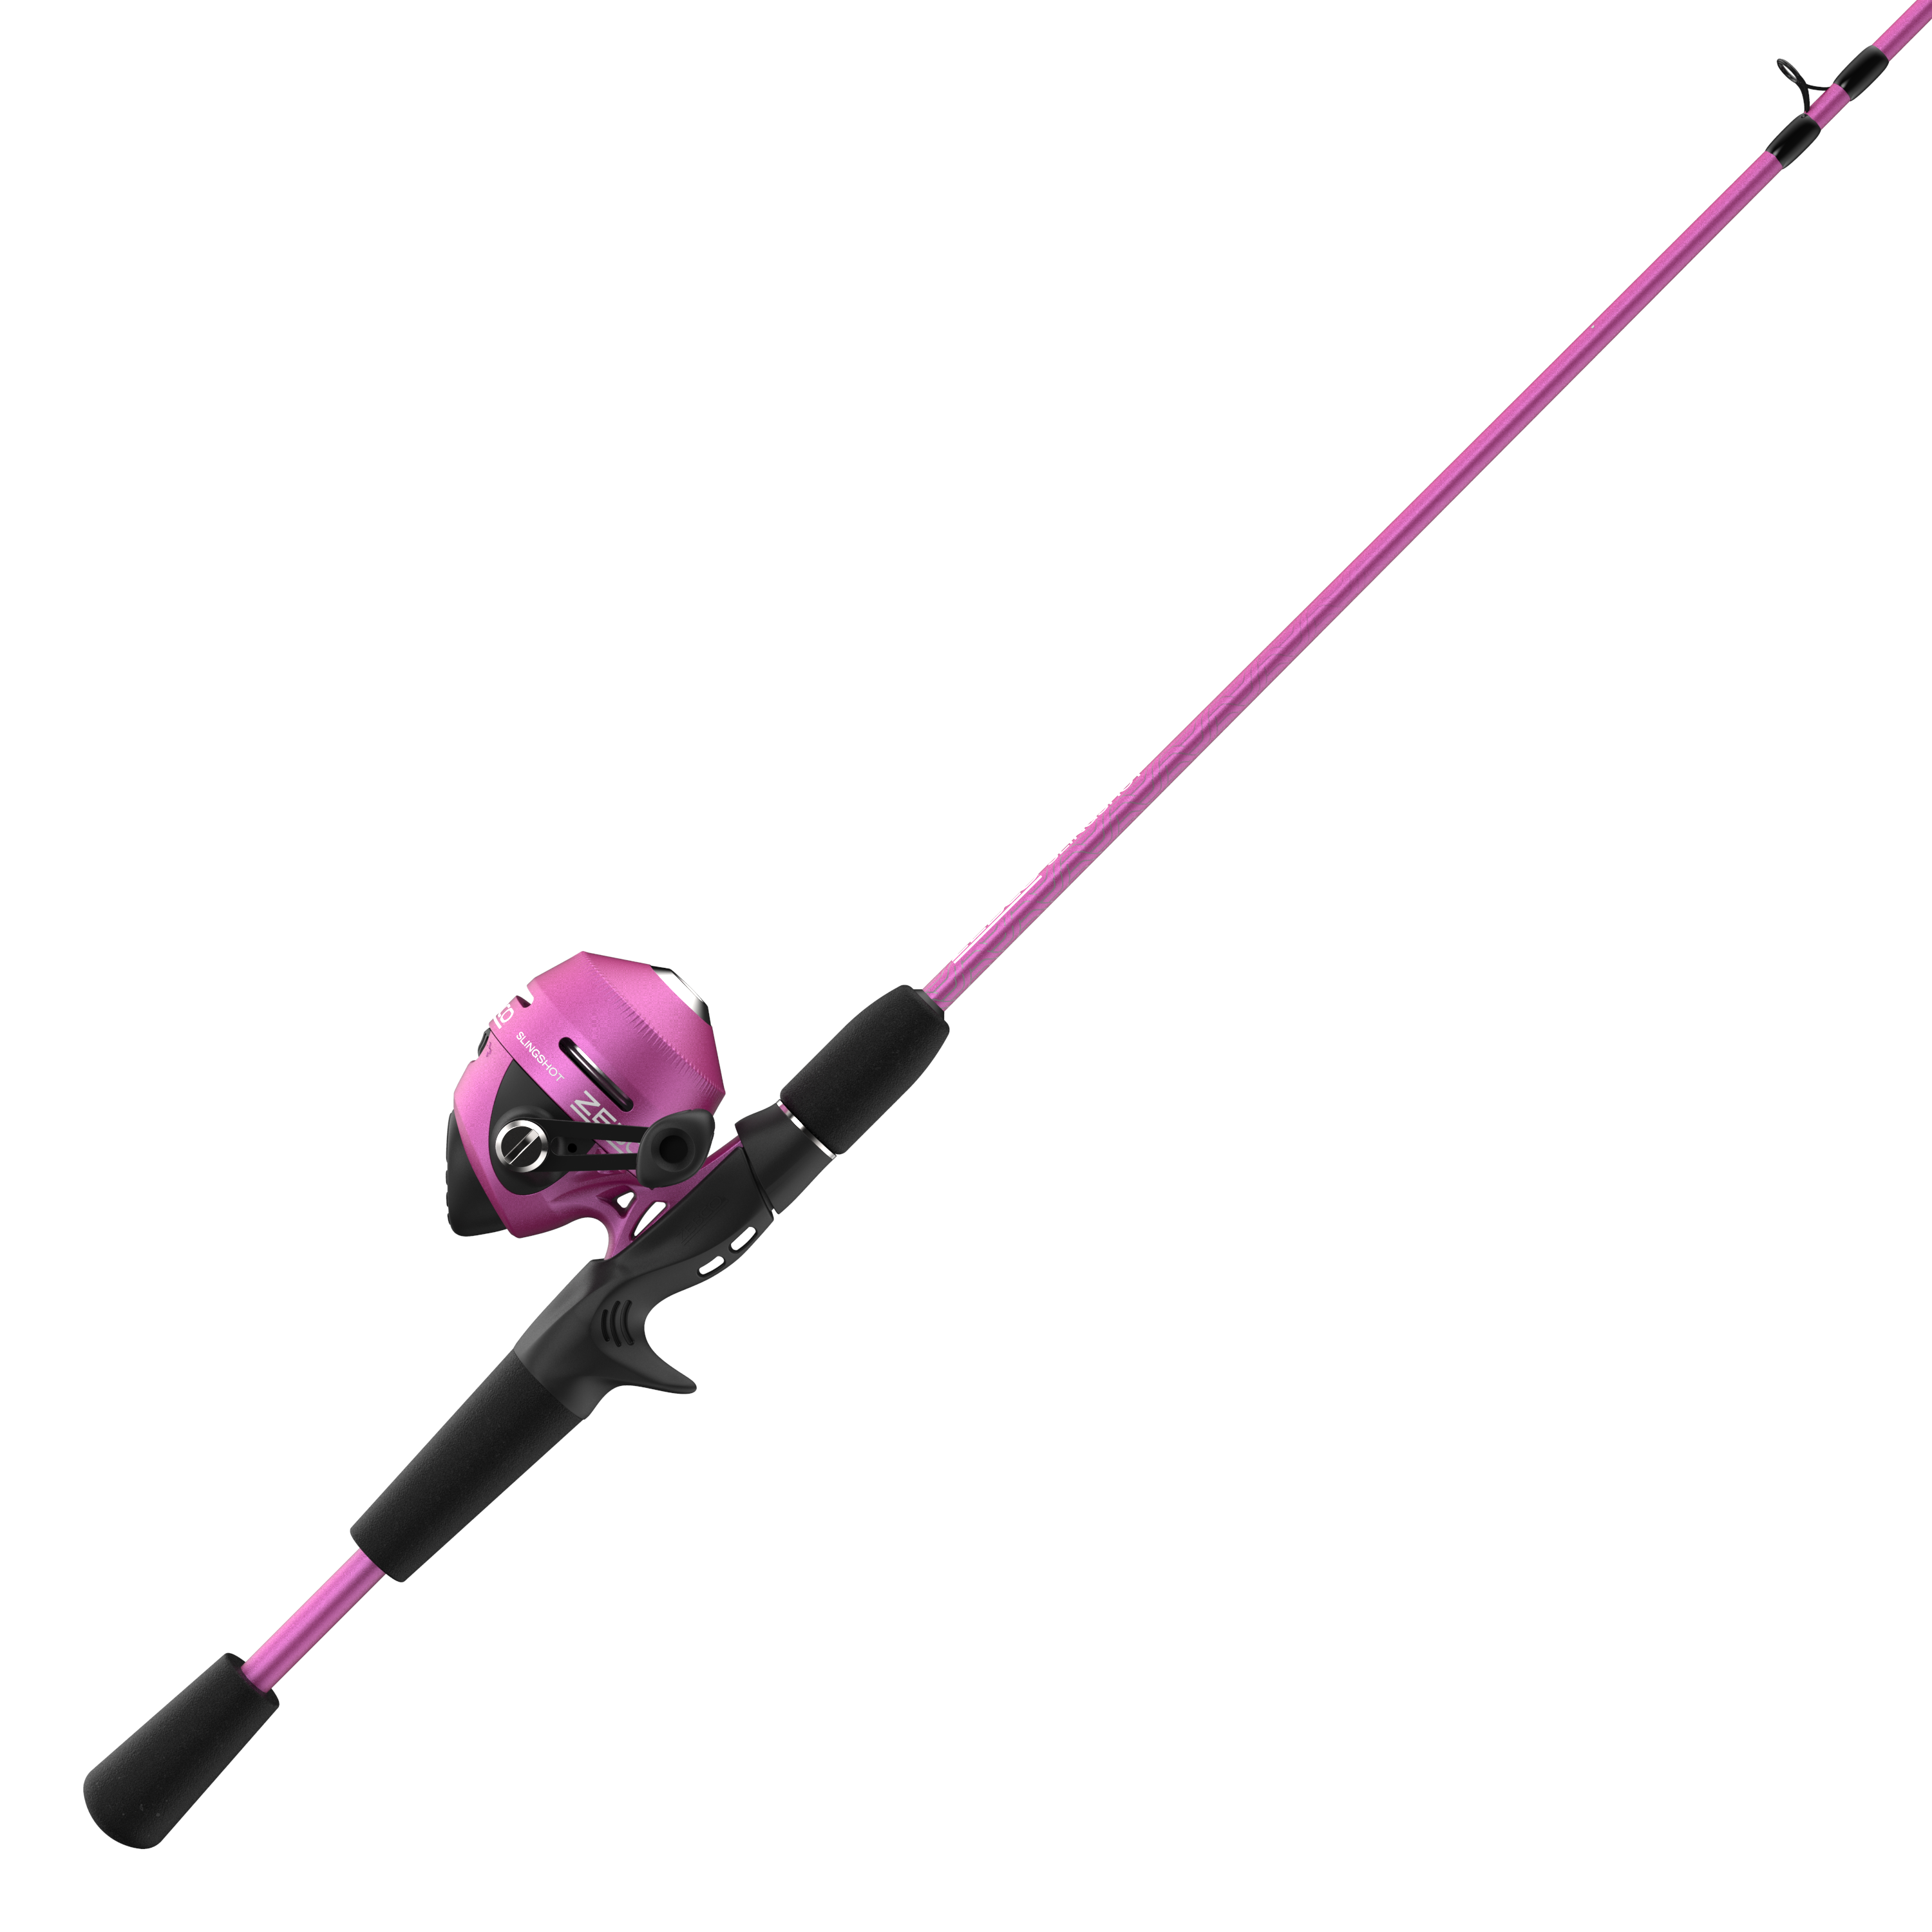 Zebco Slingshot Spincast Reel and Fishing Rod Combo, 5-Foot 6-Inch 2-Piece Fishing Pole, Size 30 Reel, Right-Hand Retrieve, Pre-Spooled with 10-Pound Zebco Line, Purple - image 1 of 6